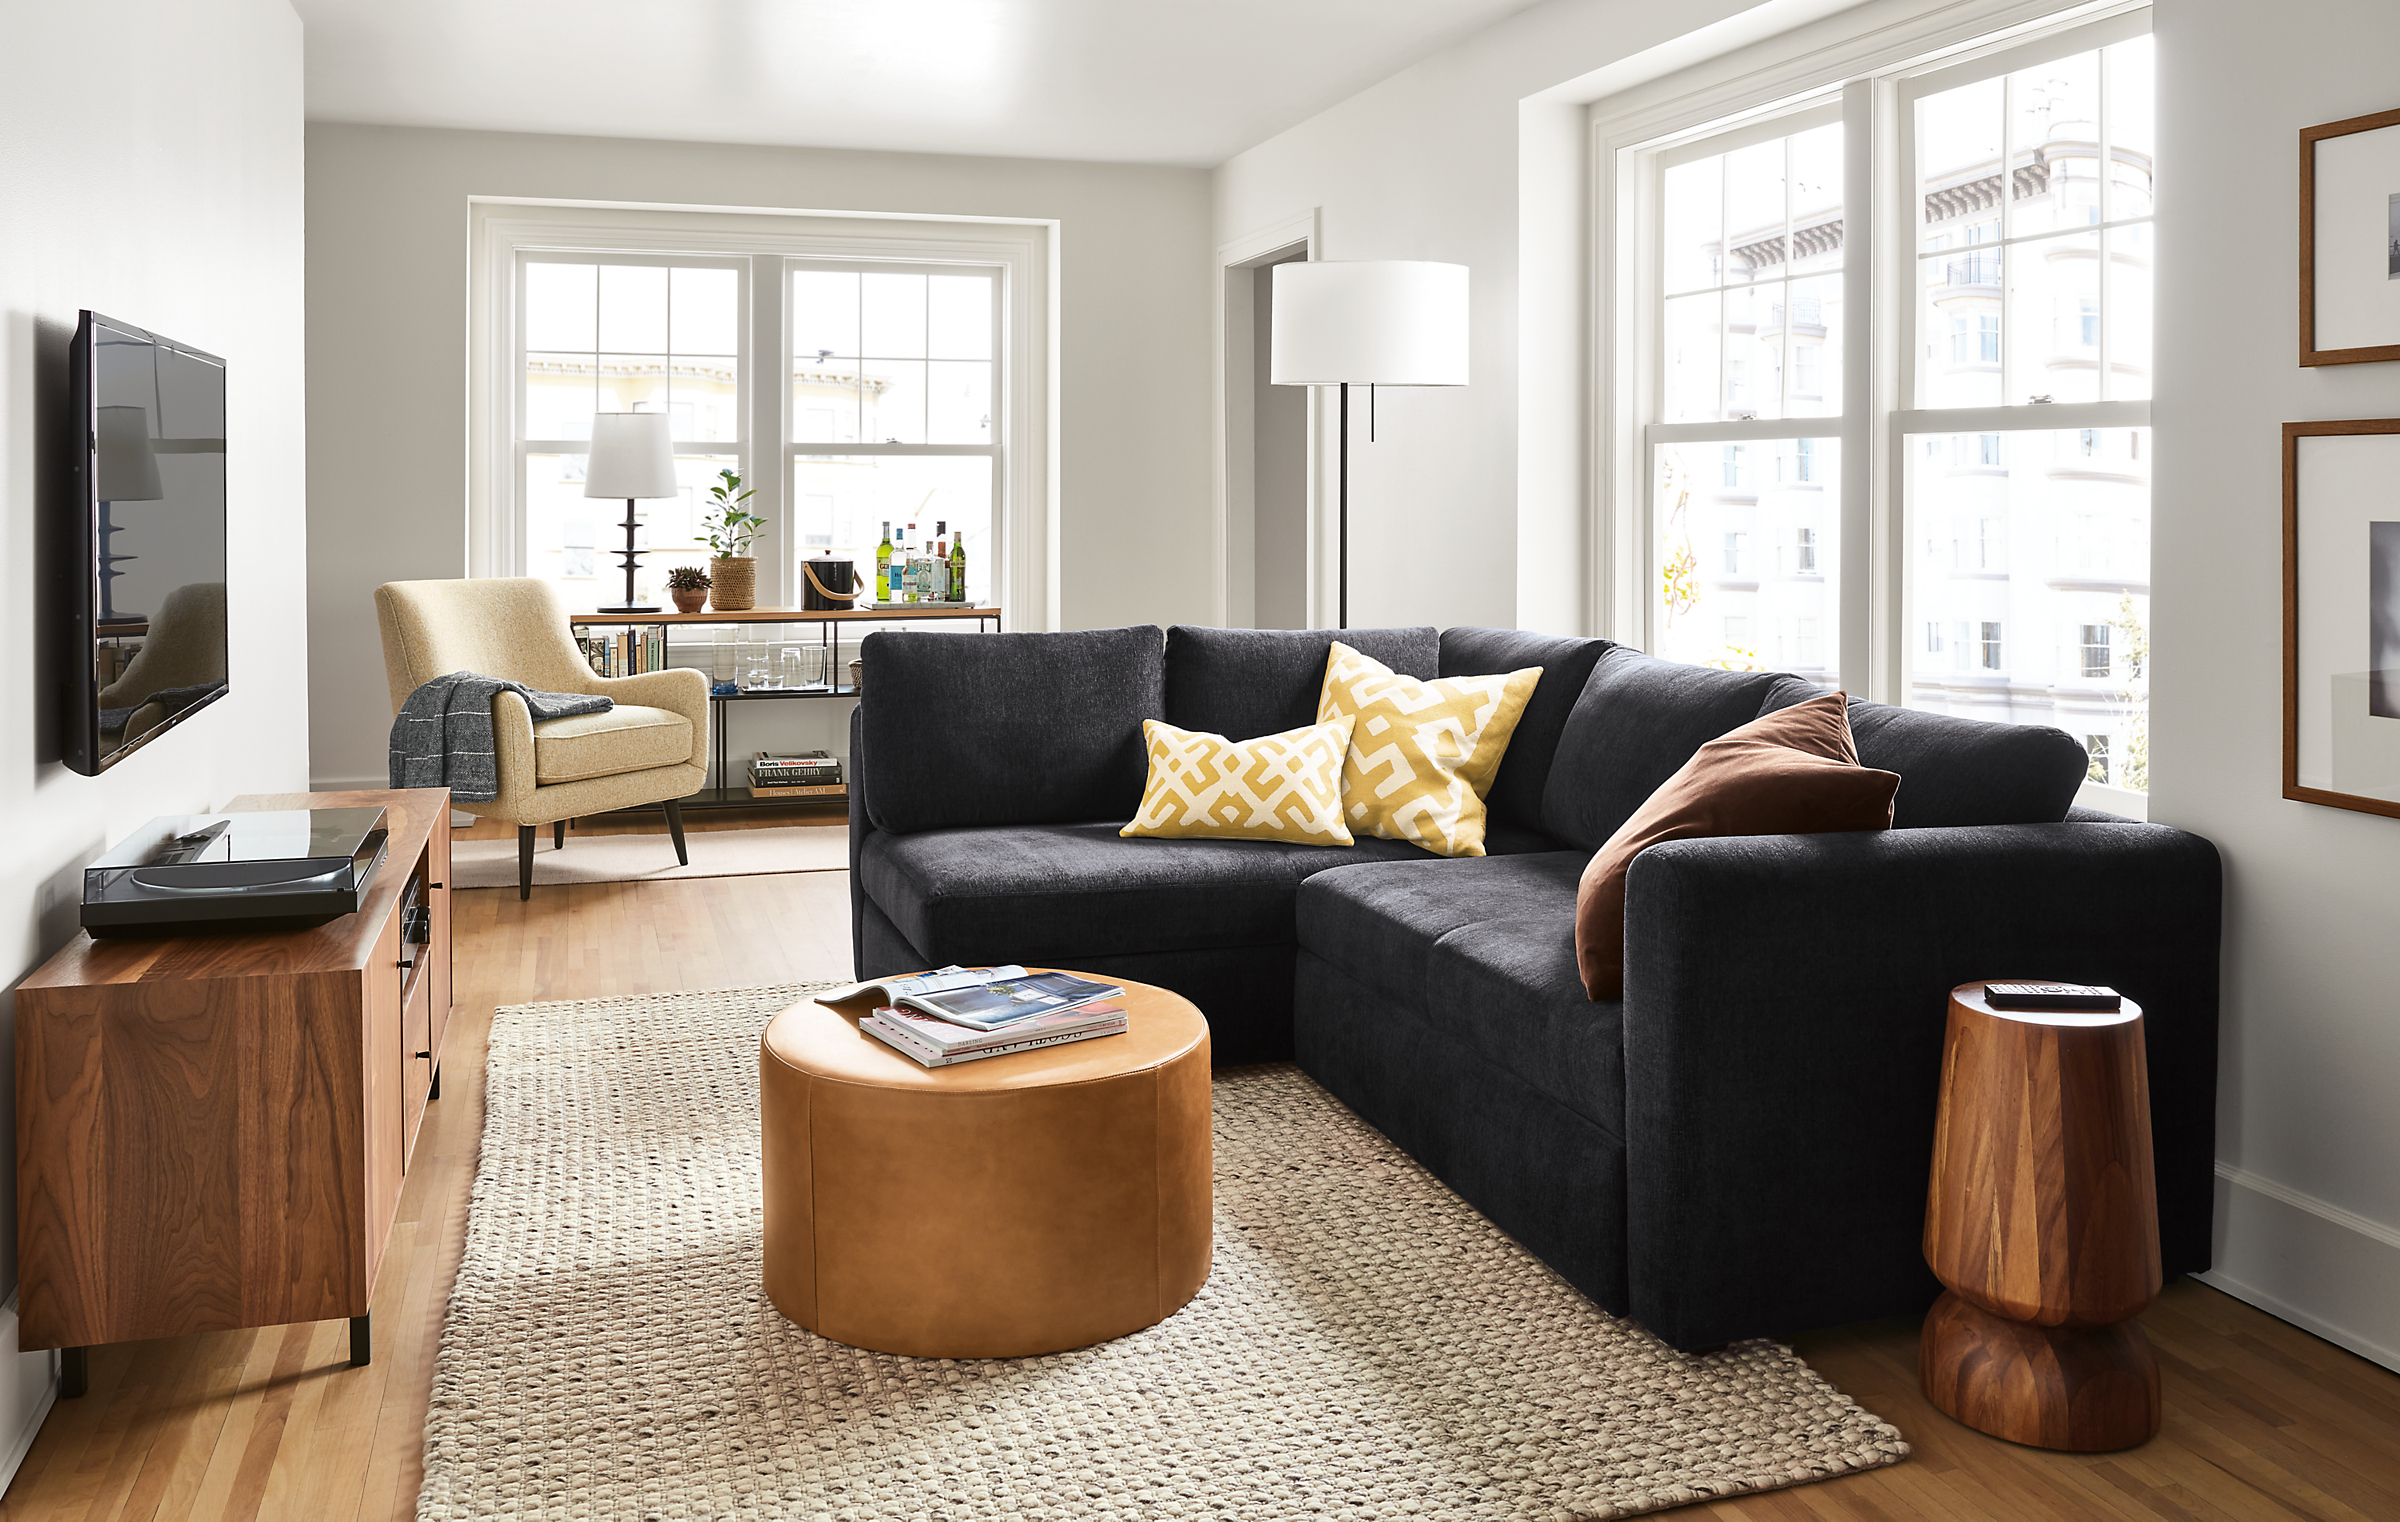 Living room setting with an Oxford Pop-Up Platform Sleeper and a Quinn Chair with an Aero Round Ottoman in leather.